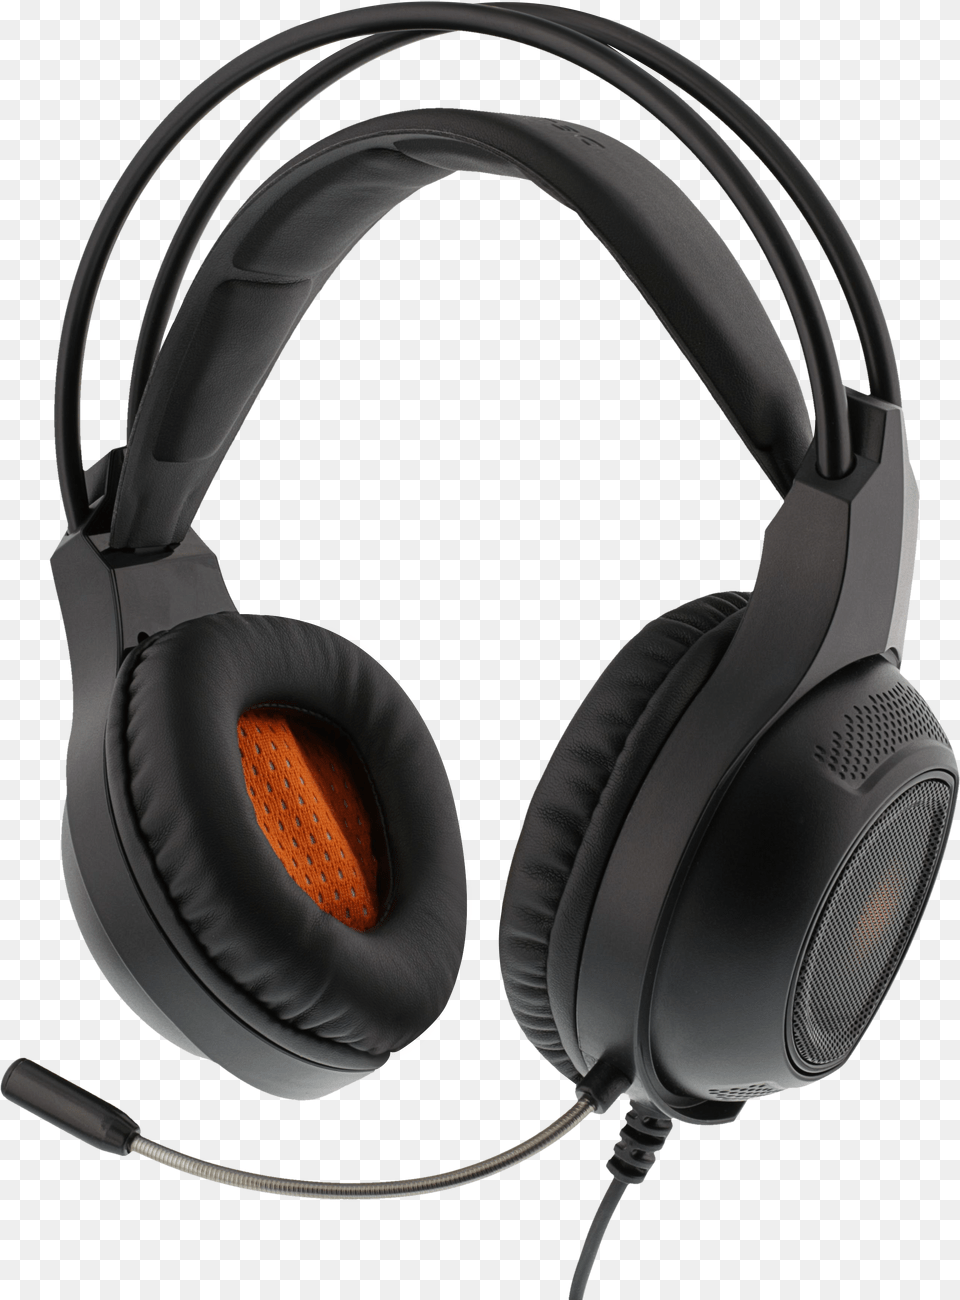 Deltaco Gaming Headset Remote Free Transparent Png